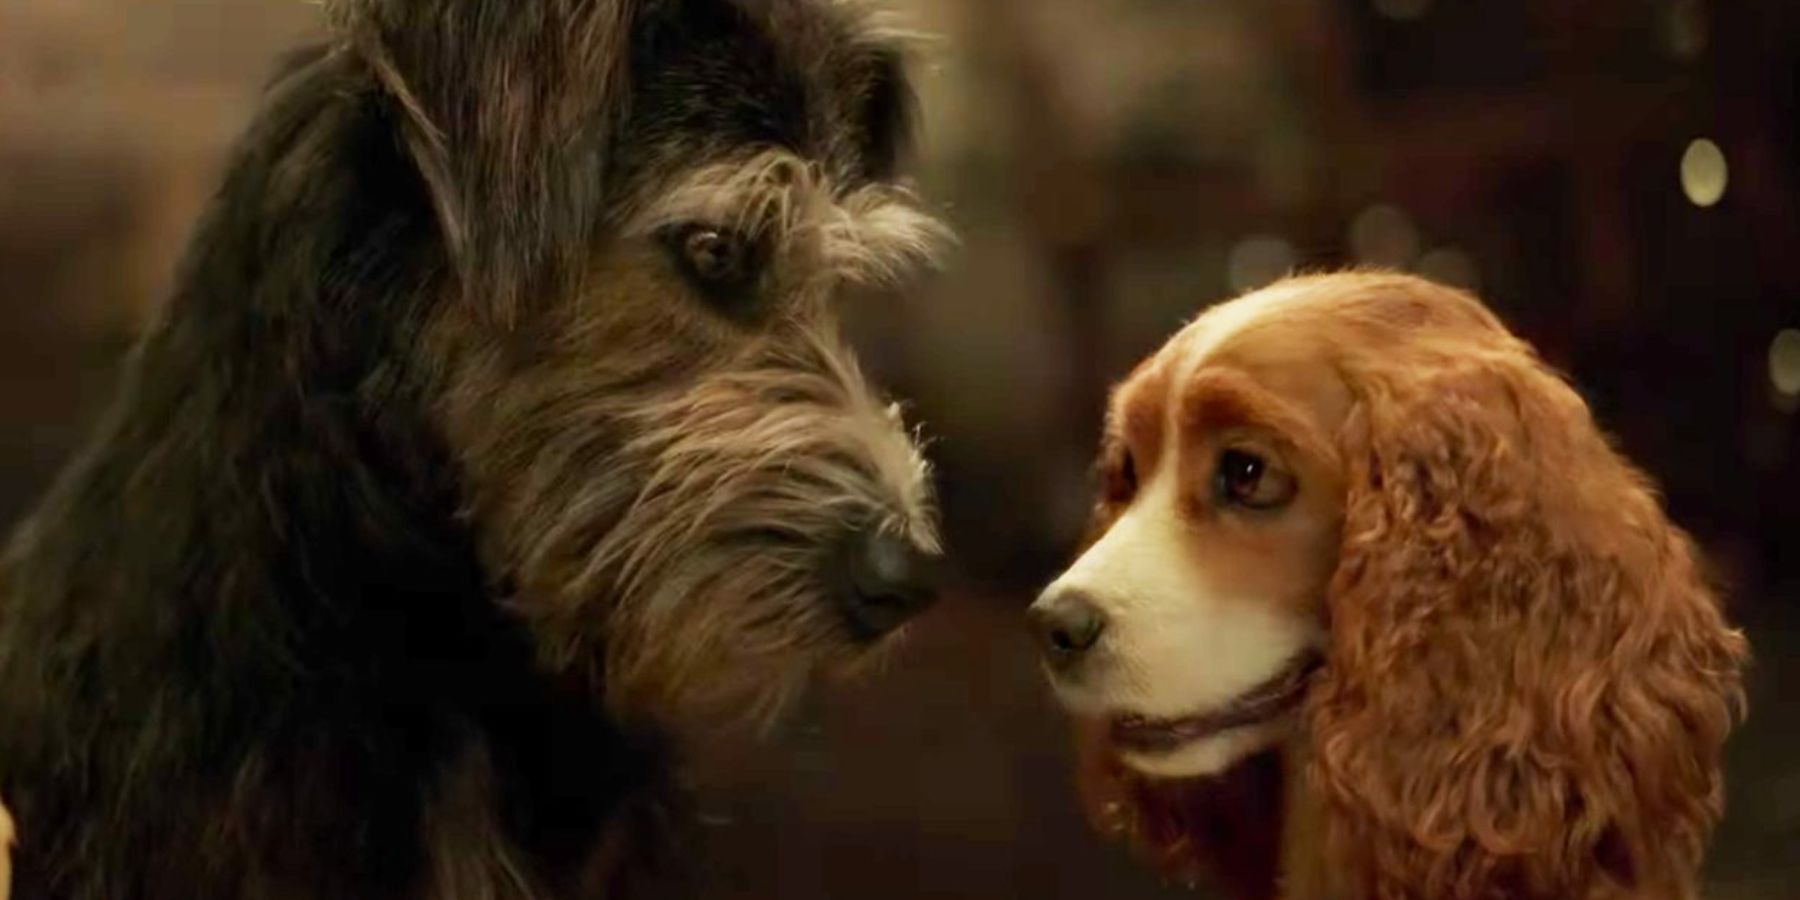 Lady and the Tramp exchanging a heartfelt look in the Disney remake